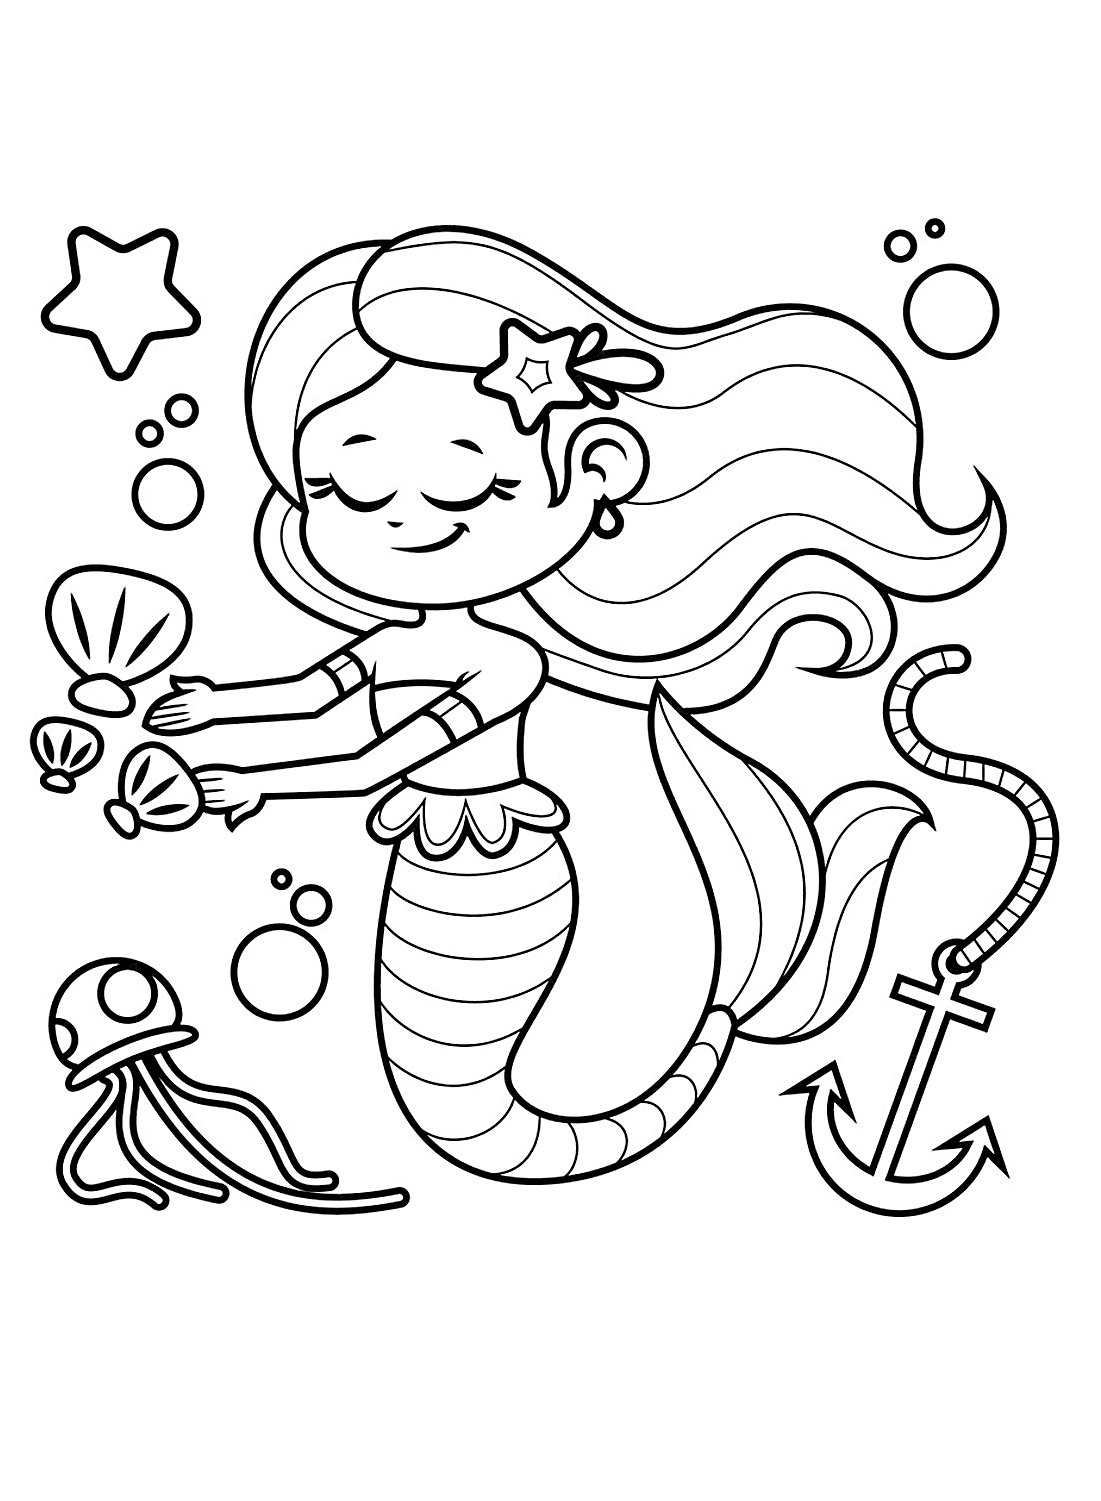 Coloring pages of mermaids